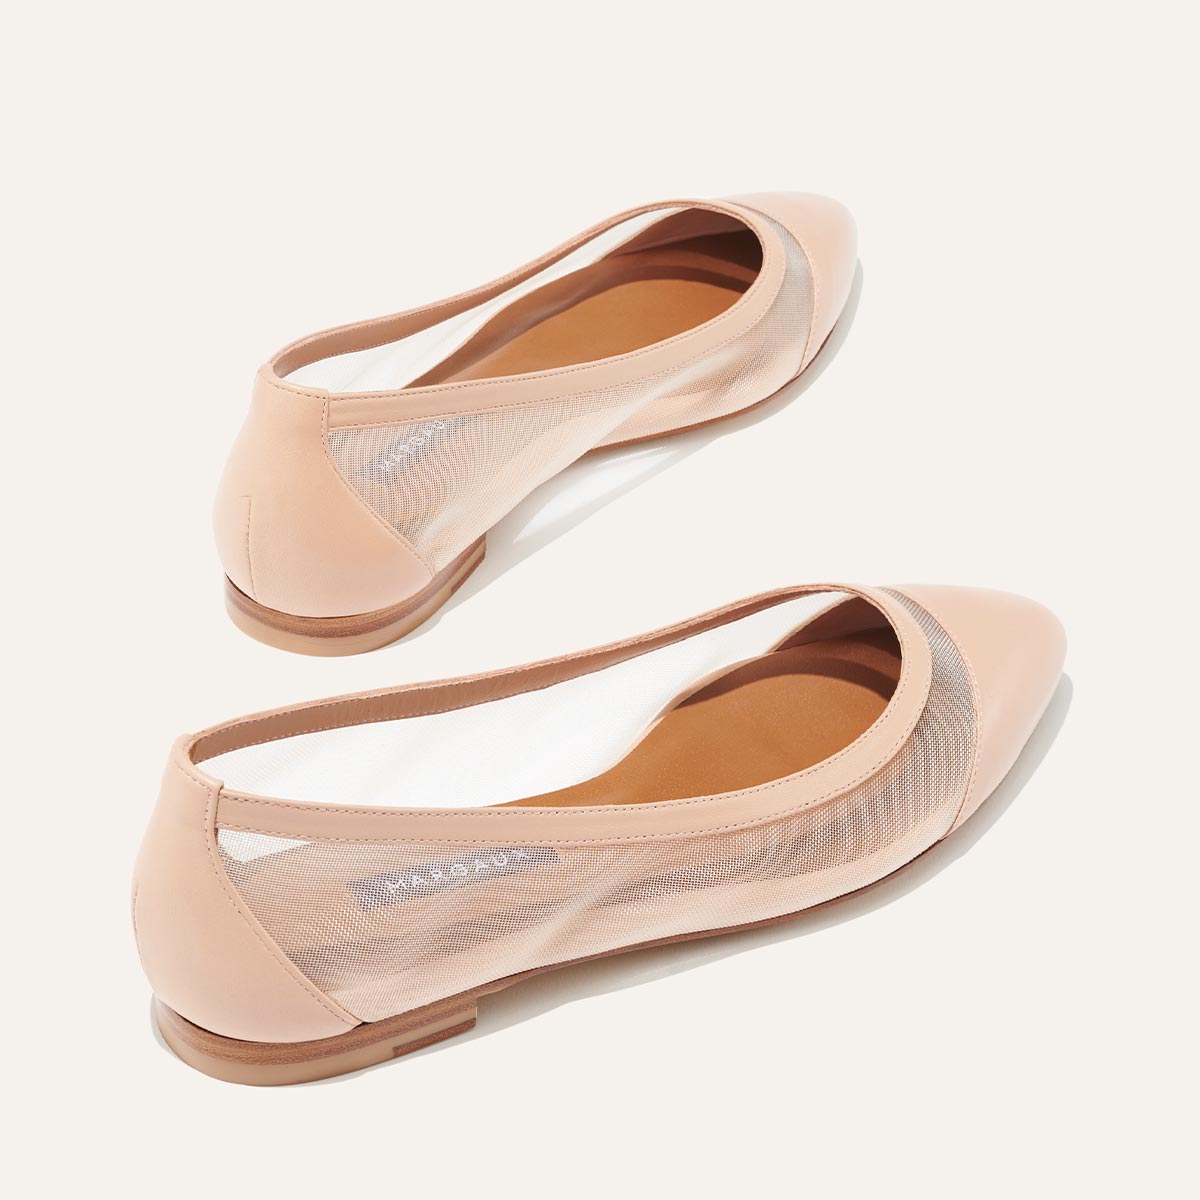 The Mesh Pointe - Rose Nappa